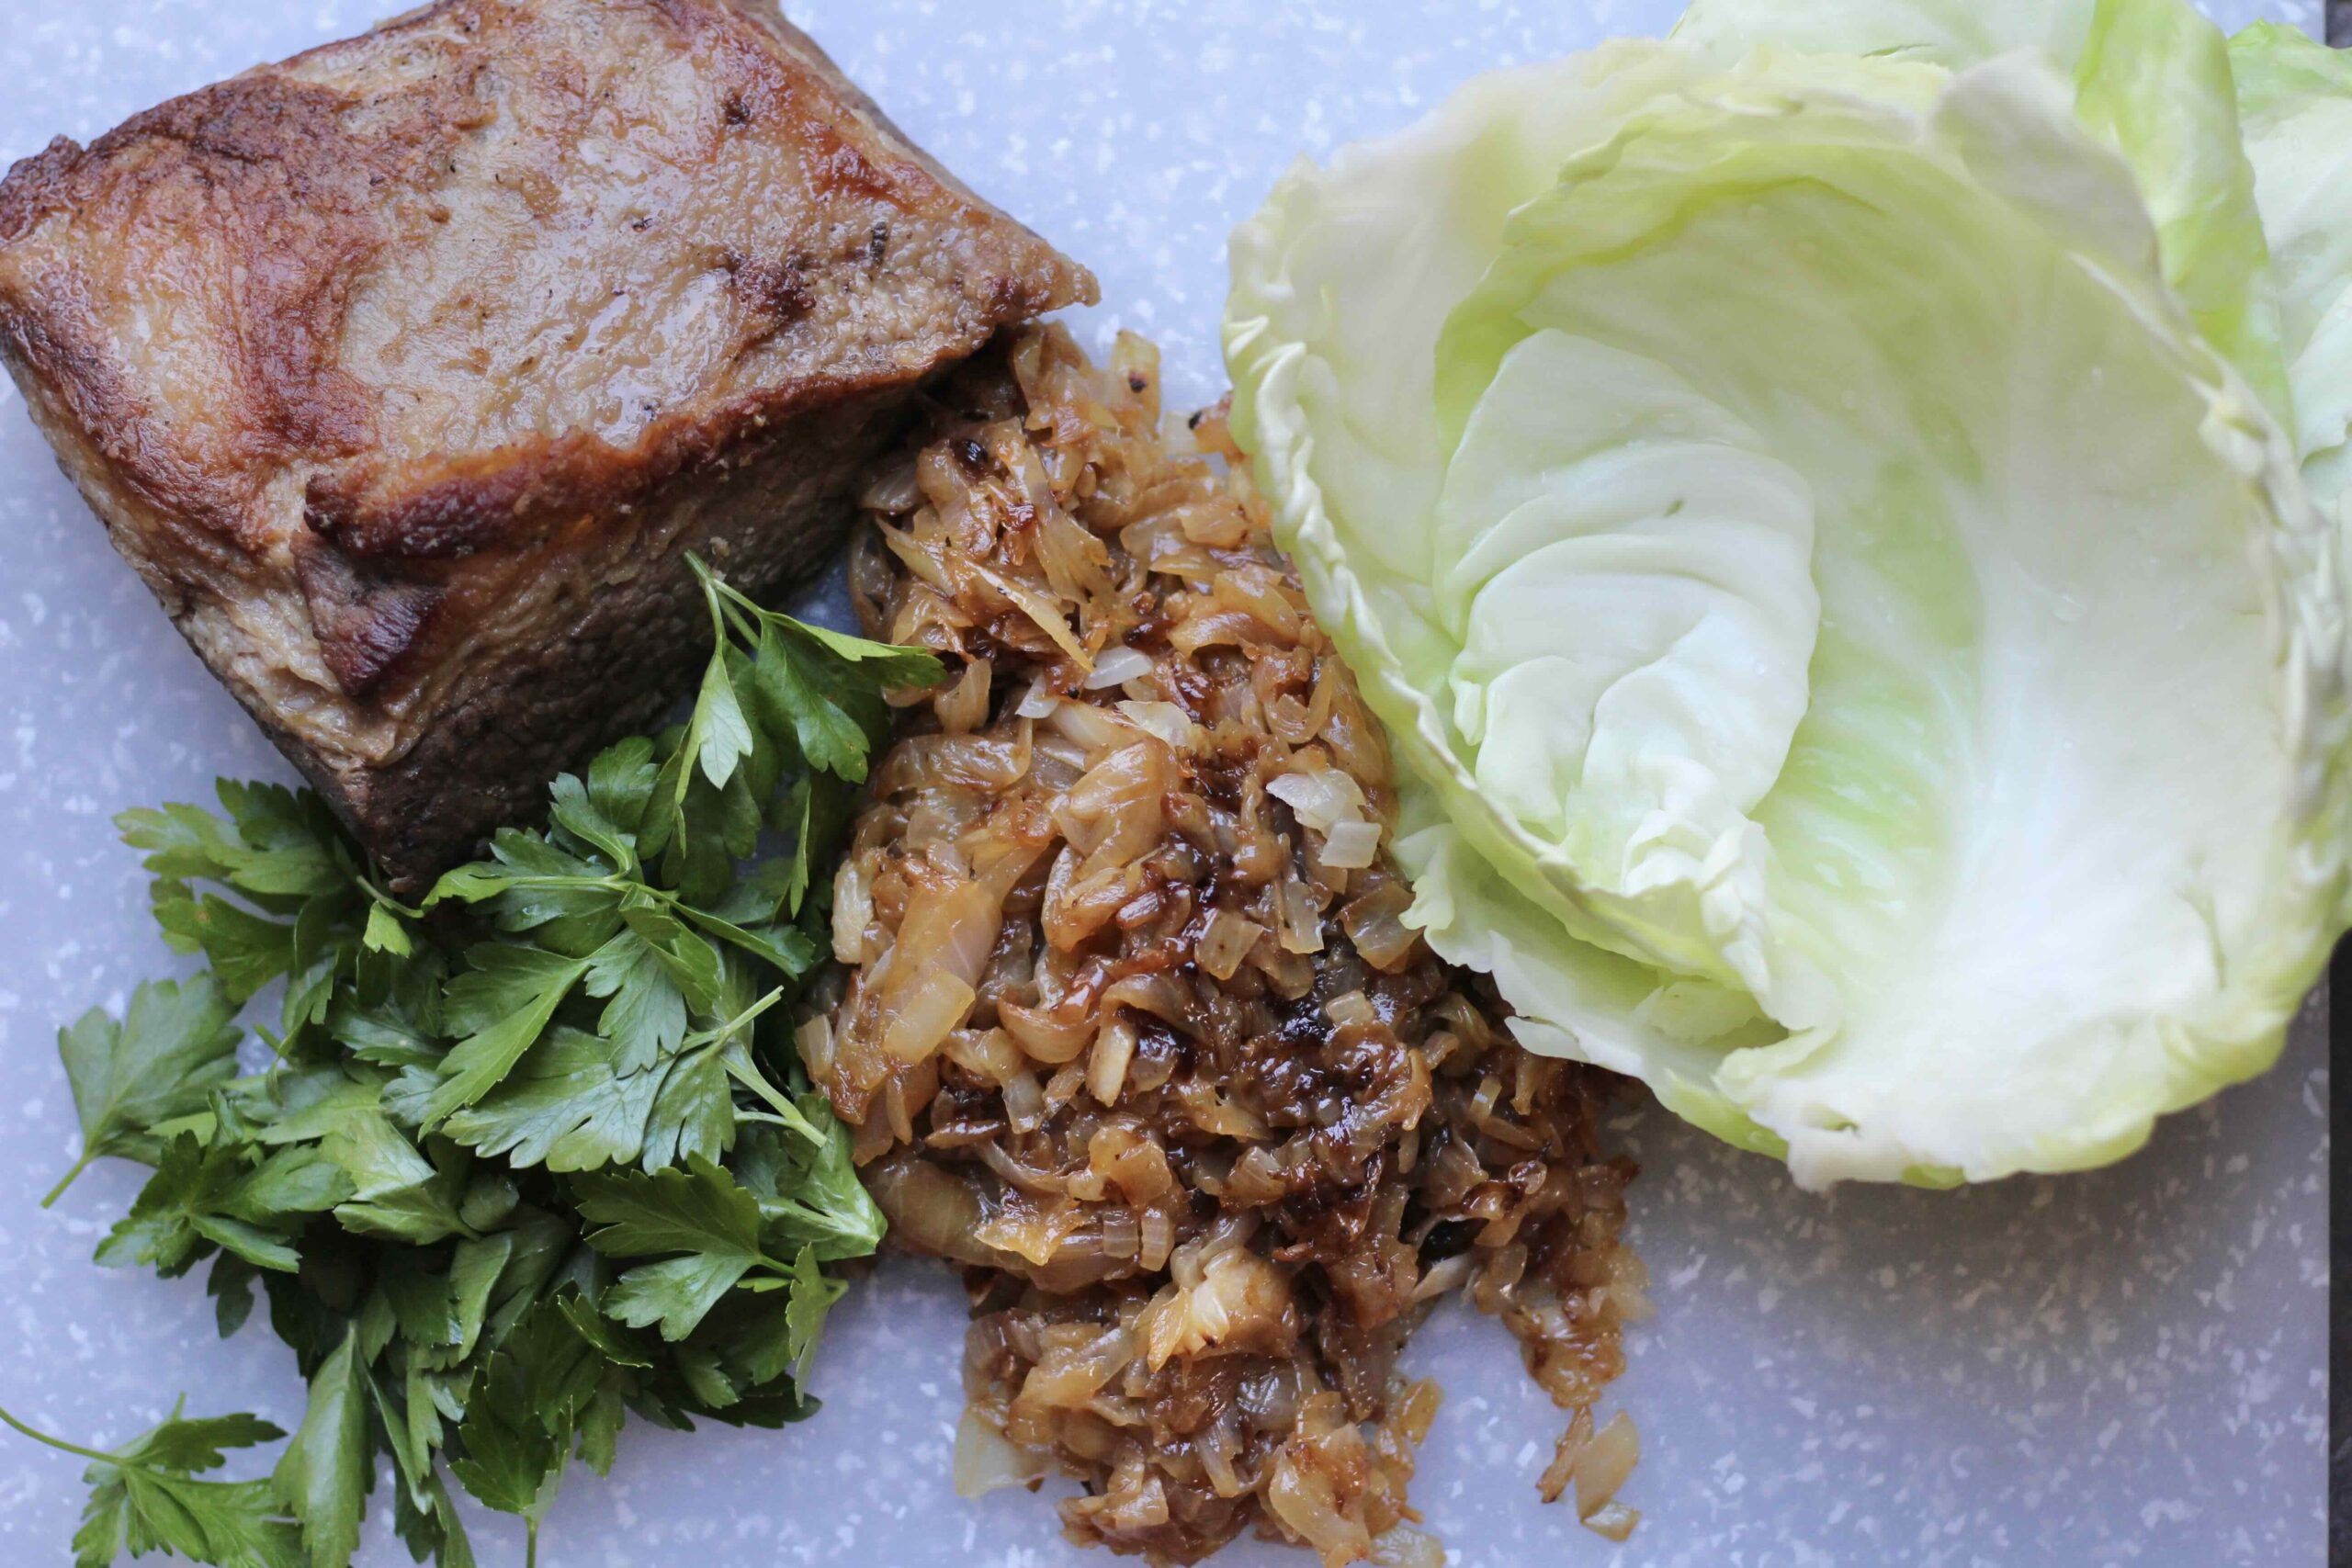 Brisket, Parsley, caramelized onions, and cabbage leaves